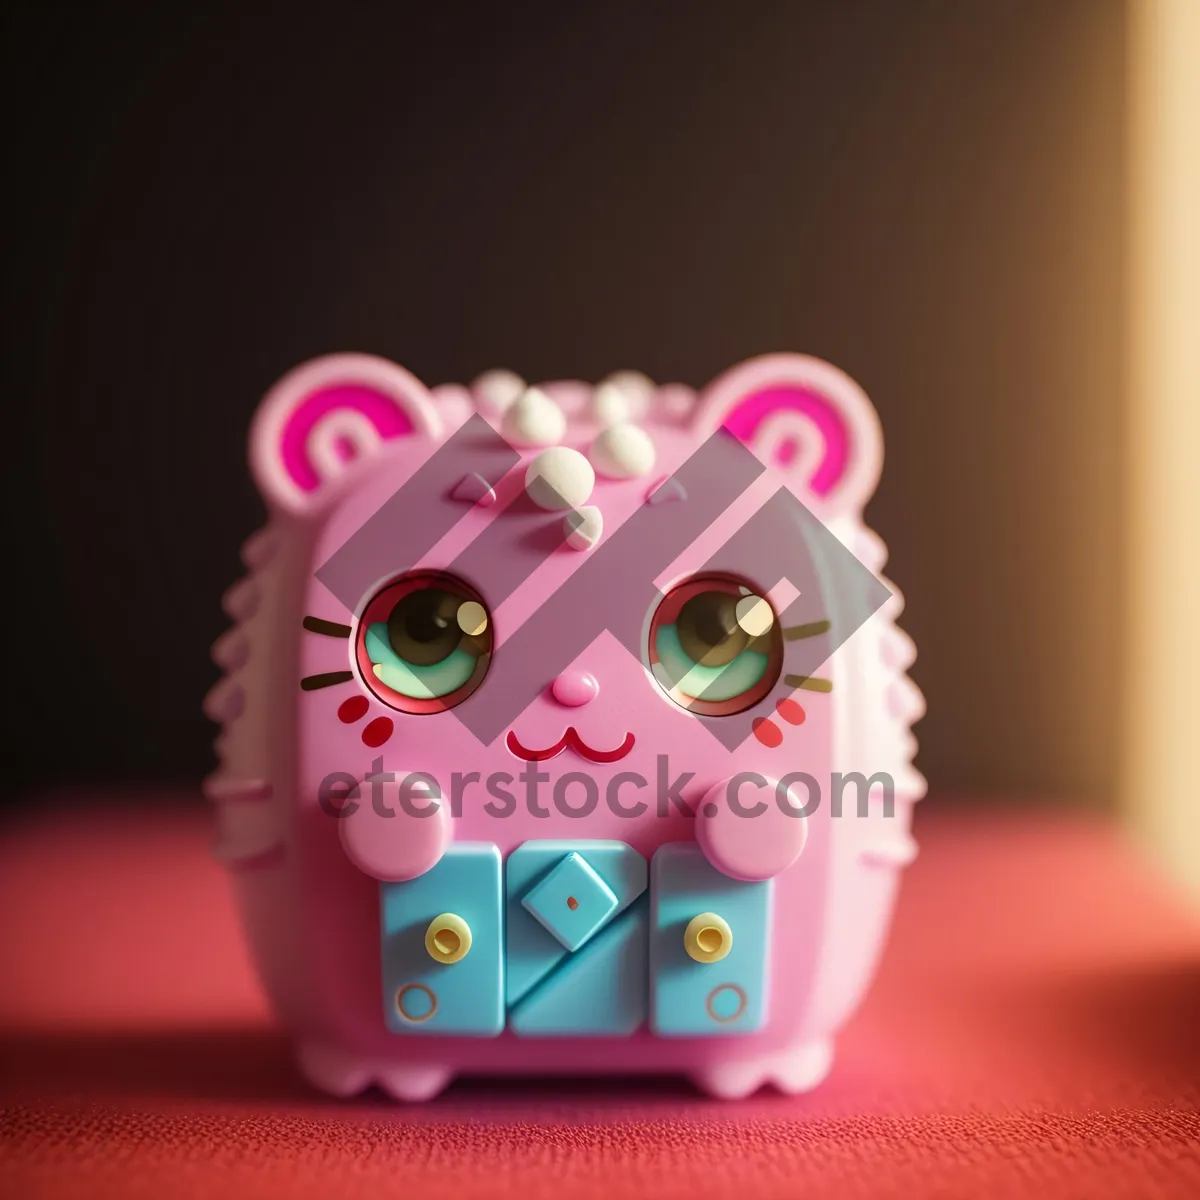 Picture of Pink Piggy Bank - Saving for Wealth and Financial Security